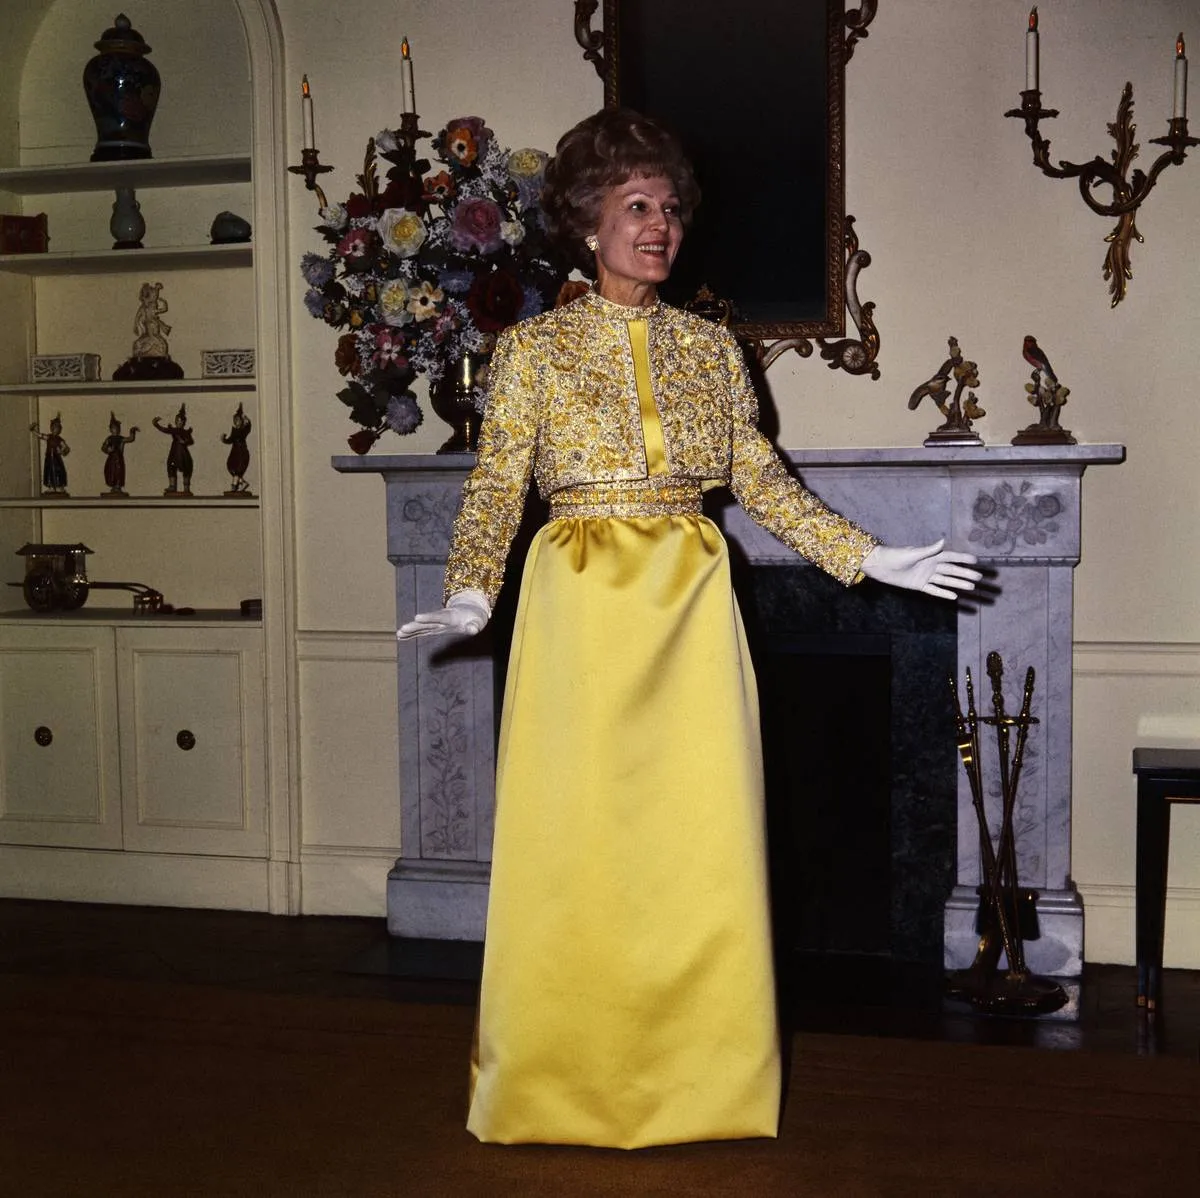 In her apartment, Pat Nixon models the gown that she wore to the Inaugural Ball.